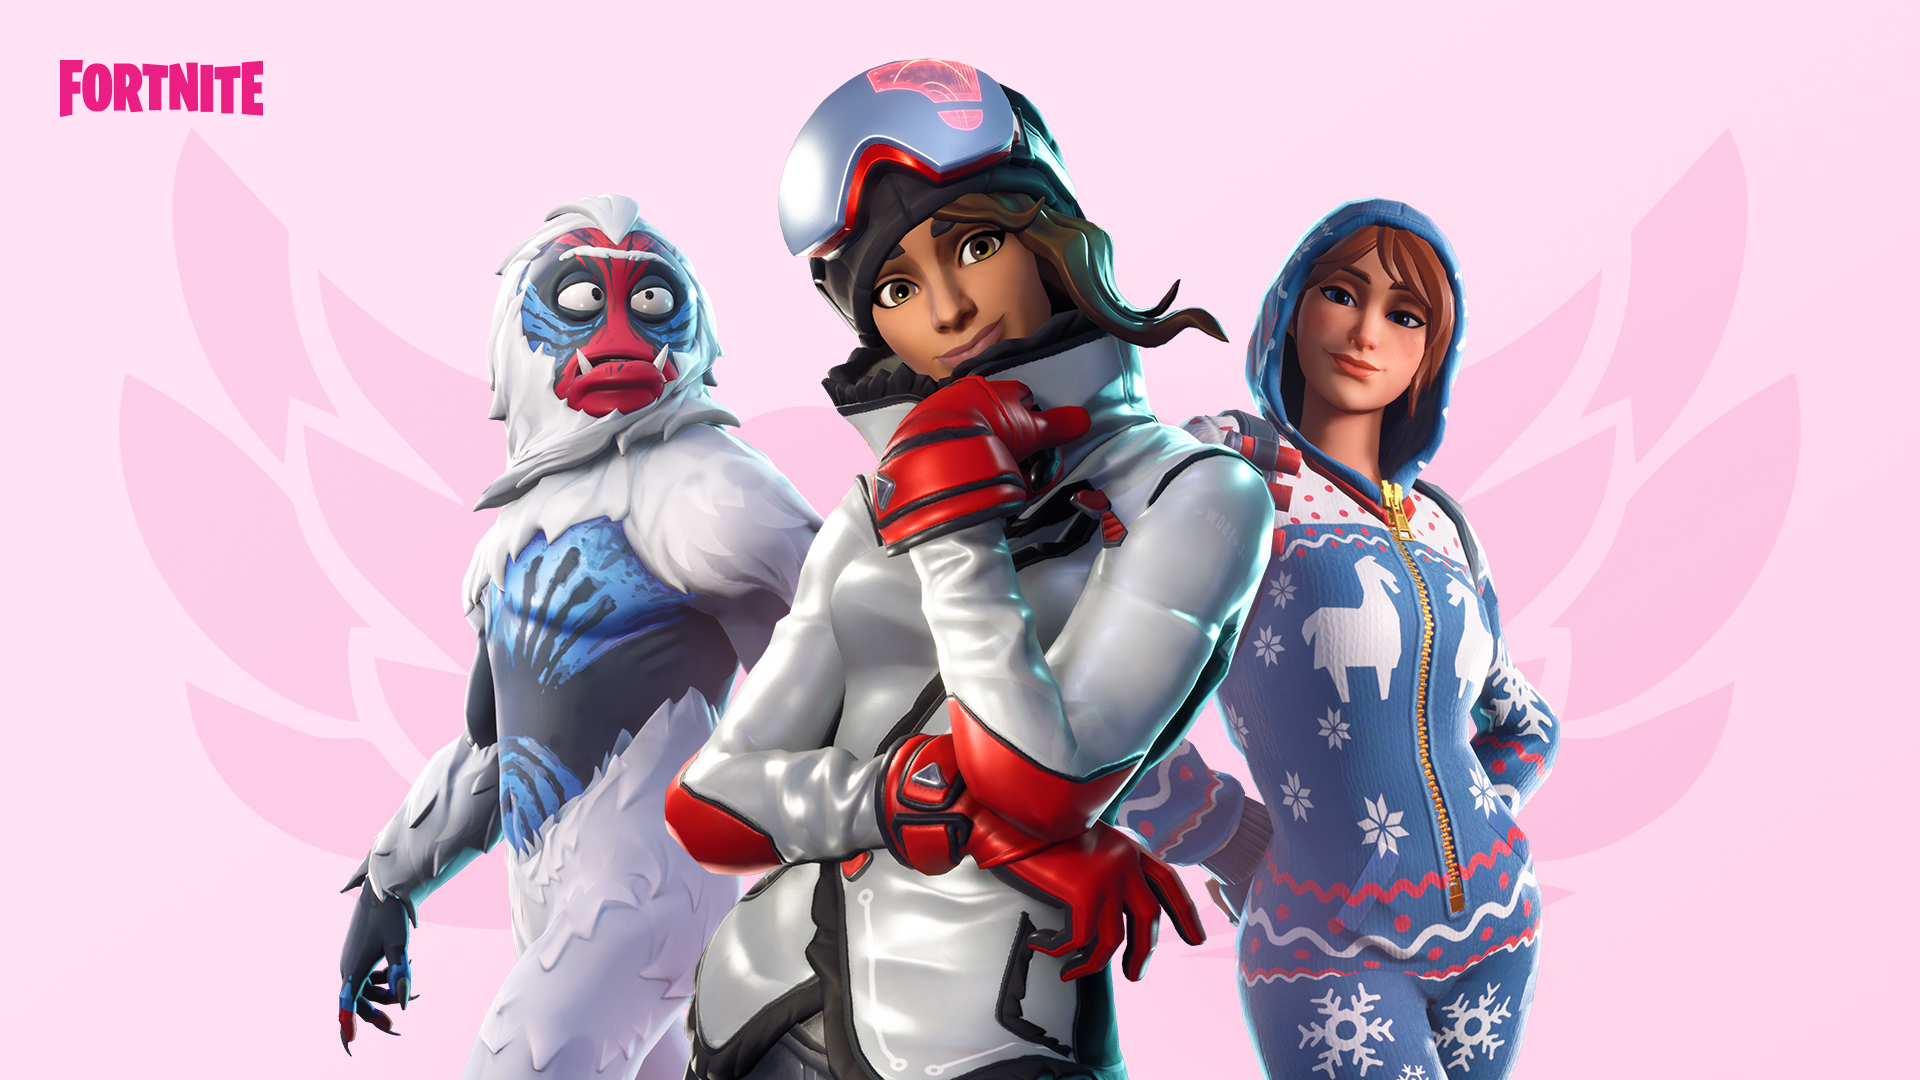 epic games reveals fortnite share the love event - epic games fortnite event